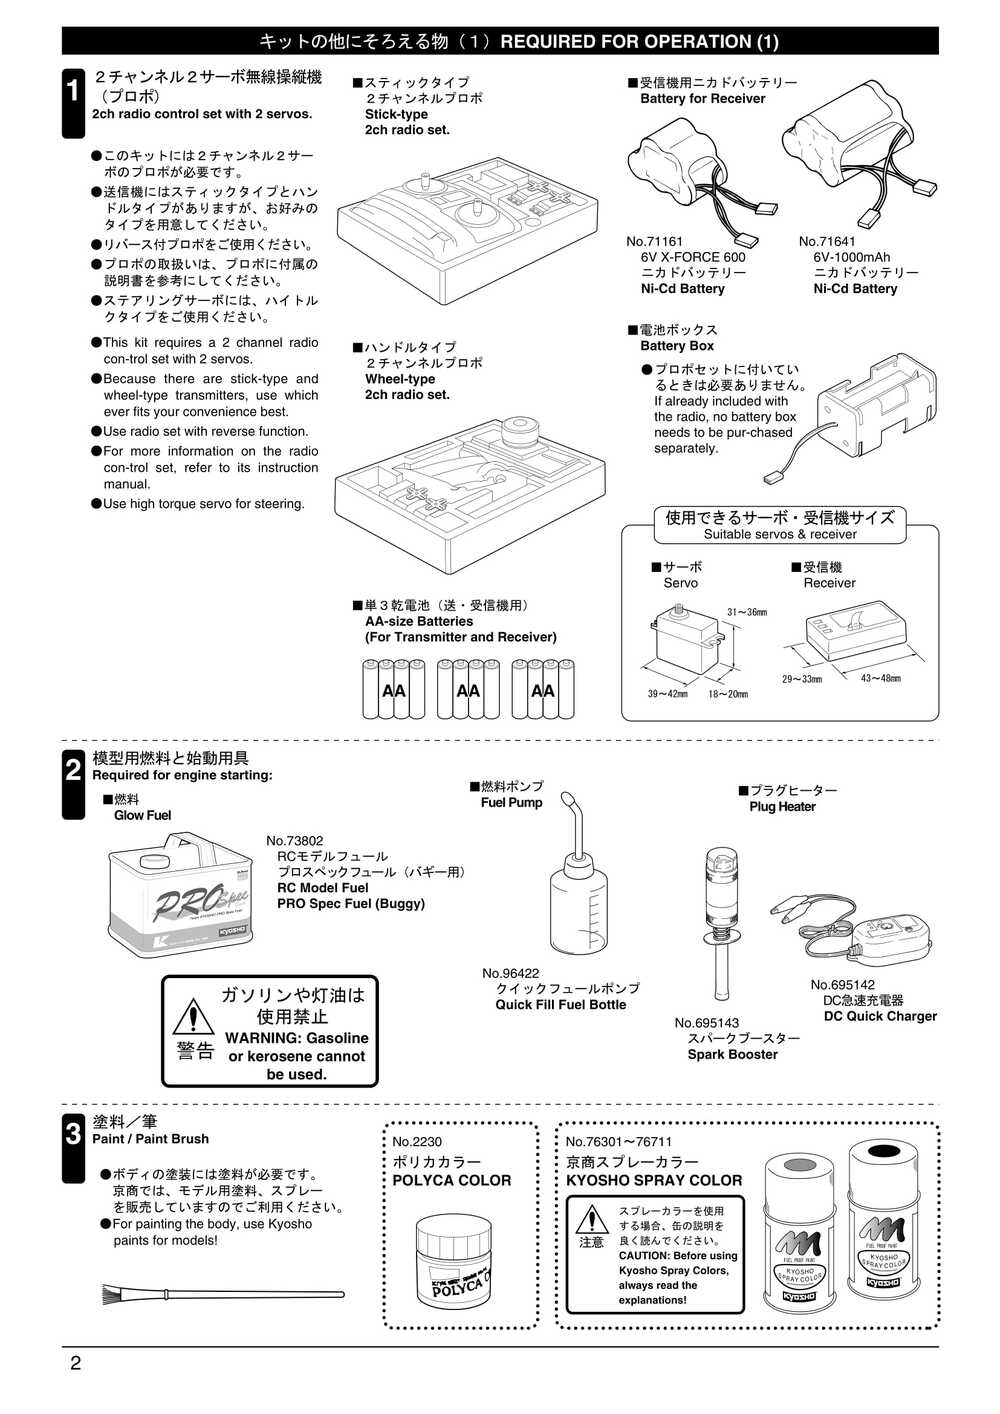 Kyosho - 31221 - Mad-Force - Manual - Page 02